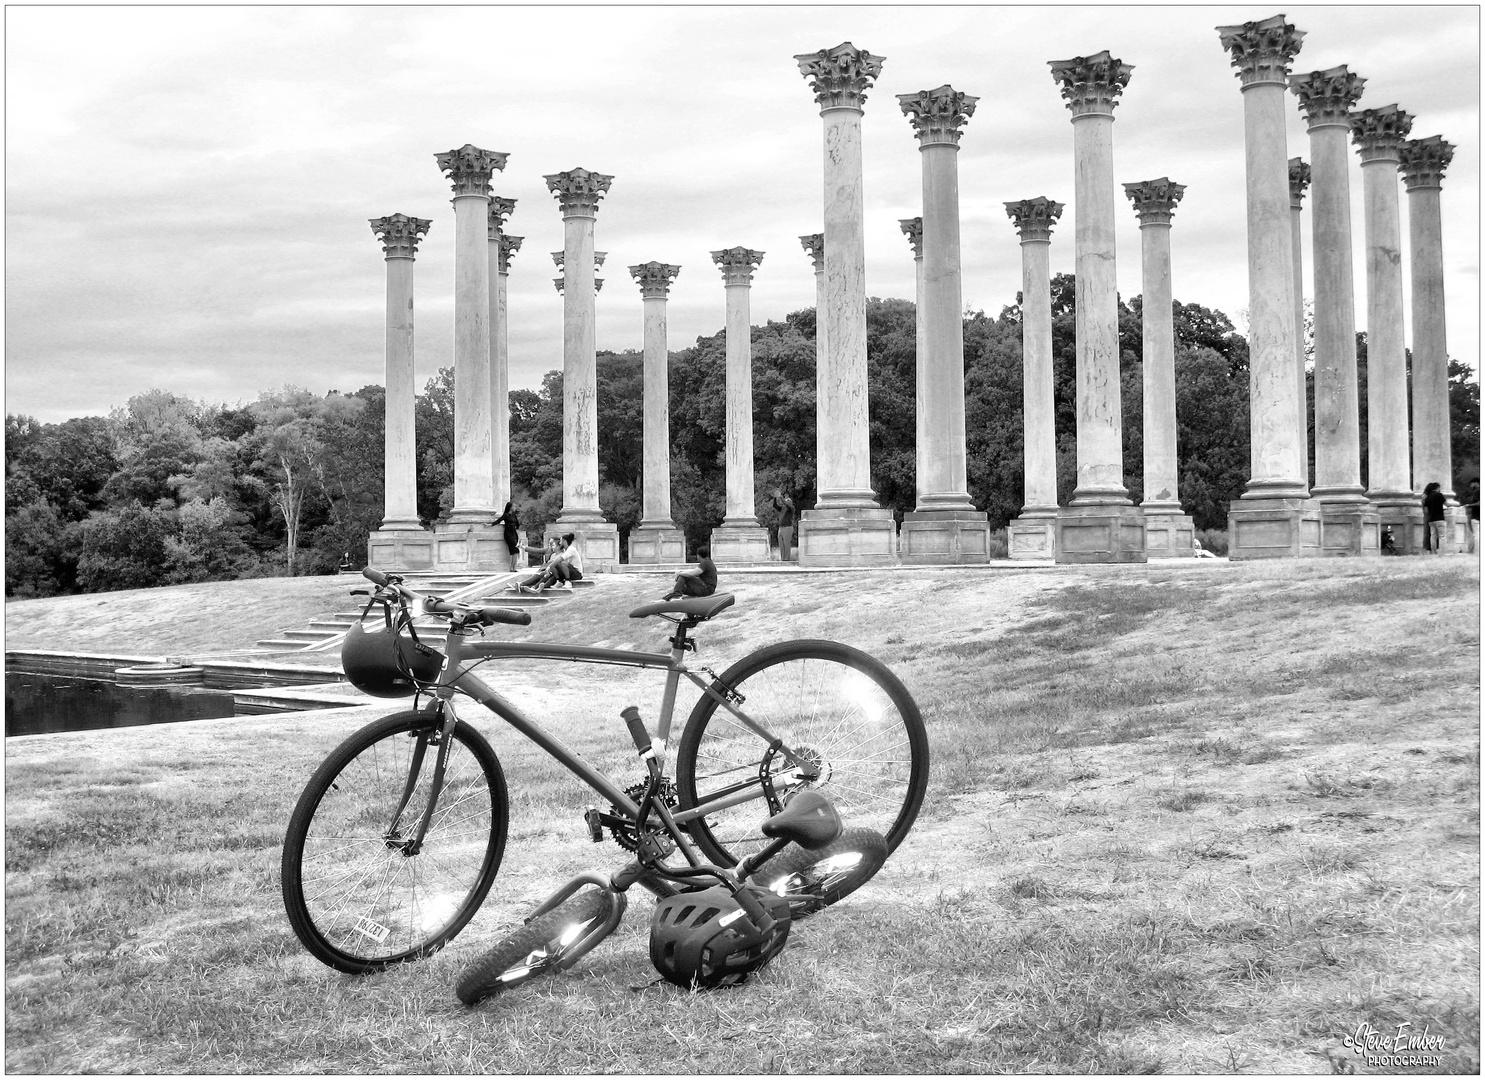 Bicycles and Columns